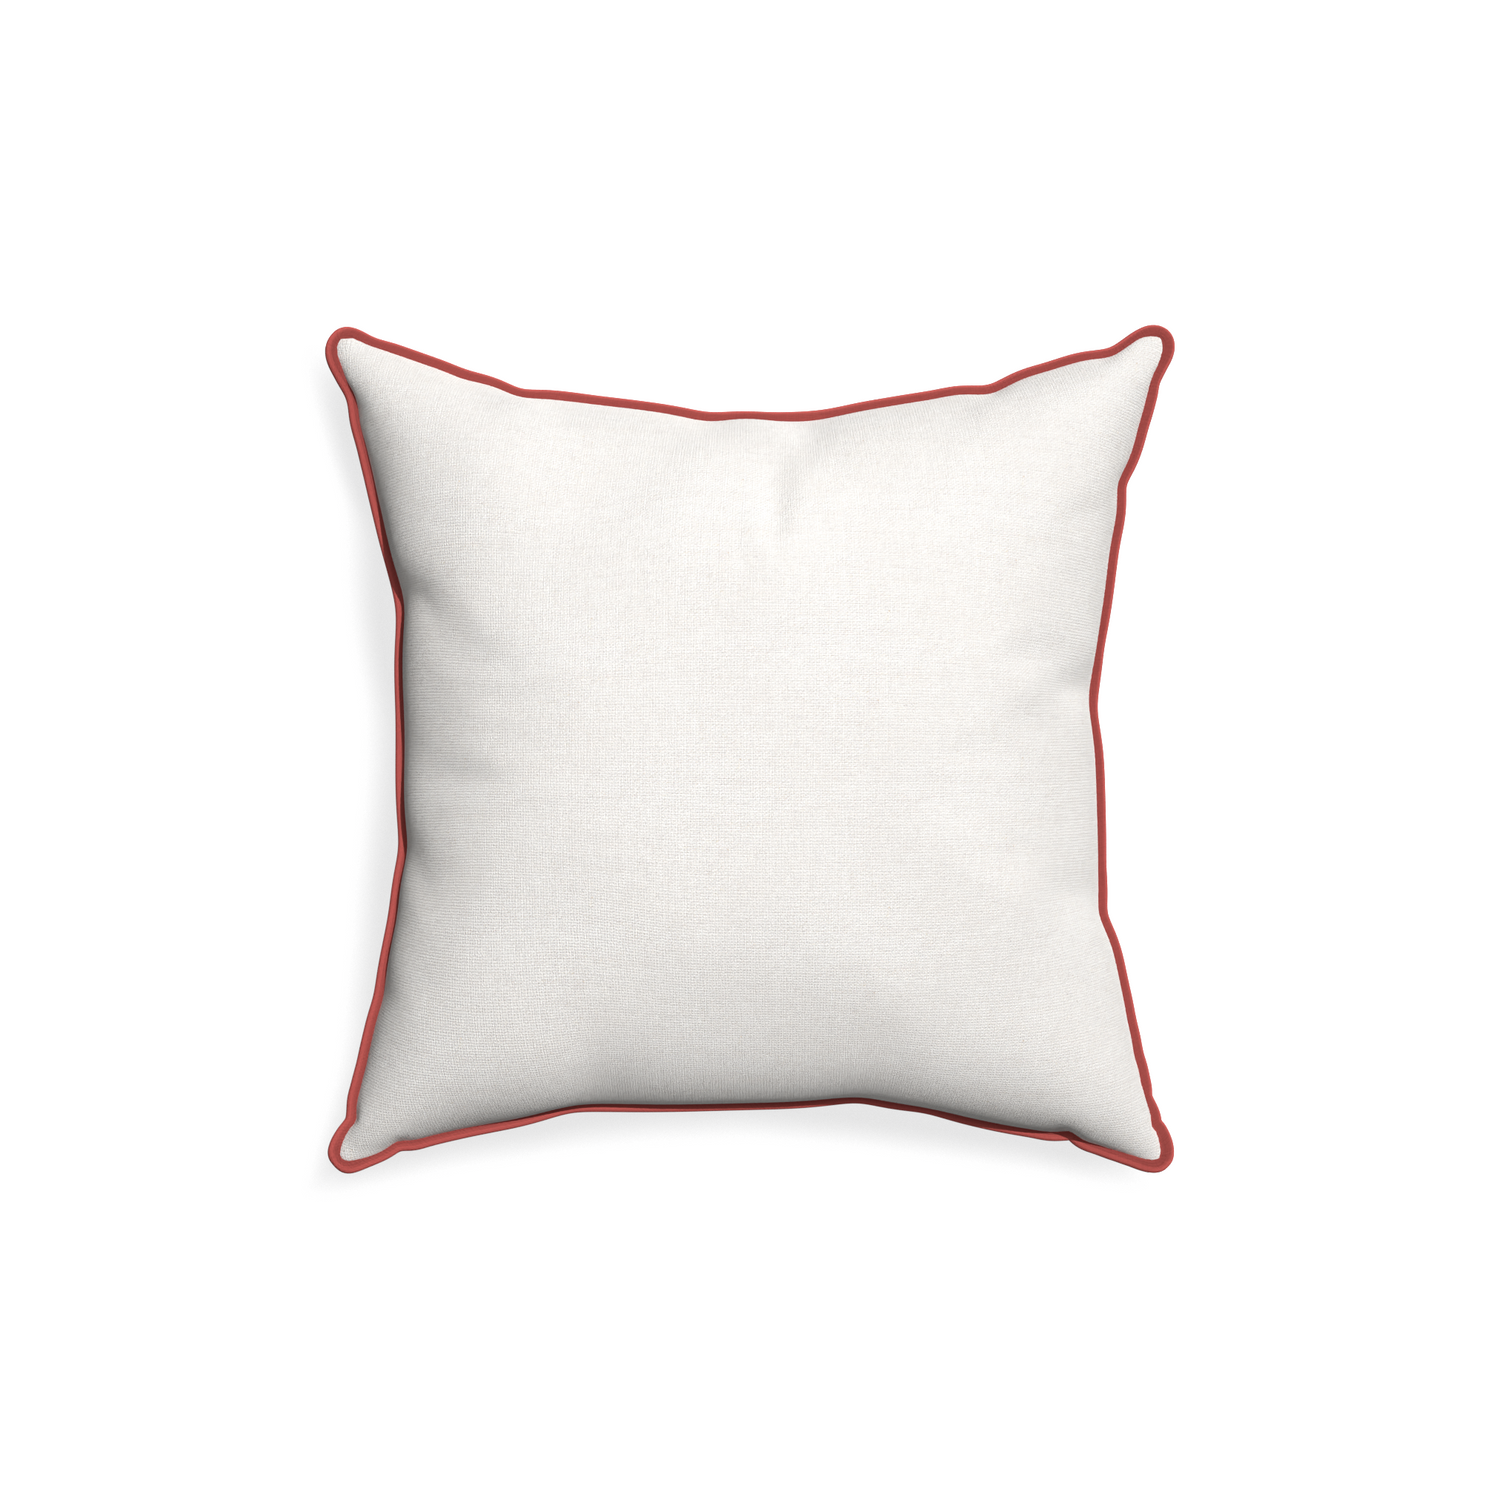 18-square flour custom pillow with c piping on white background